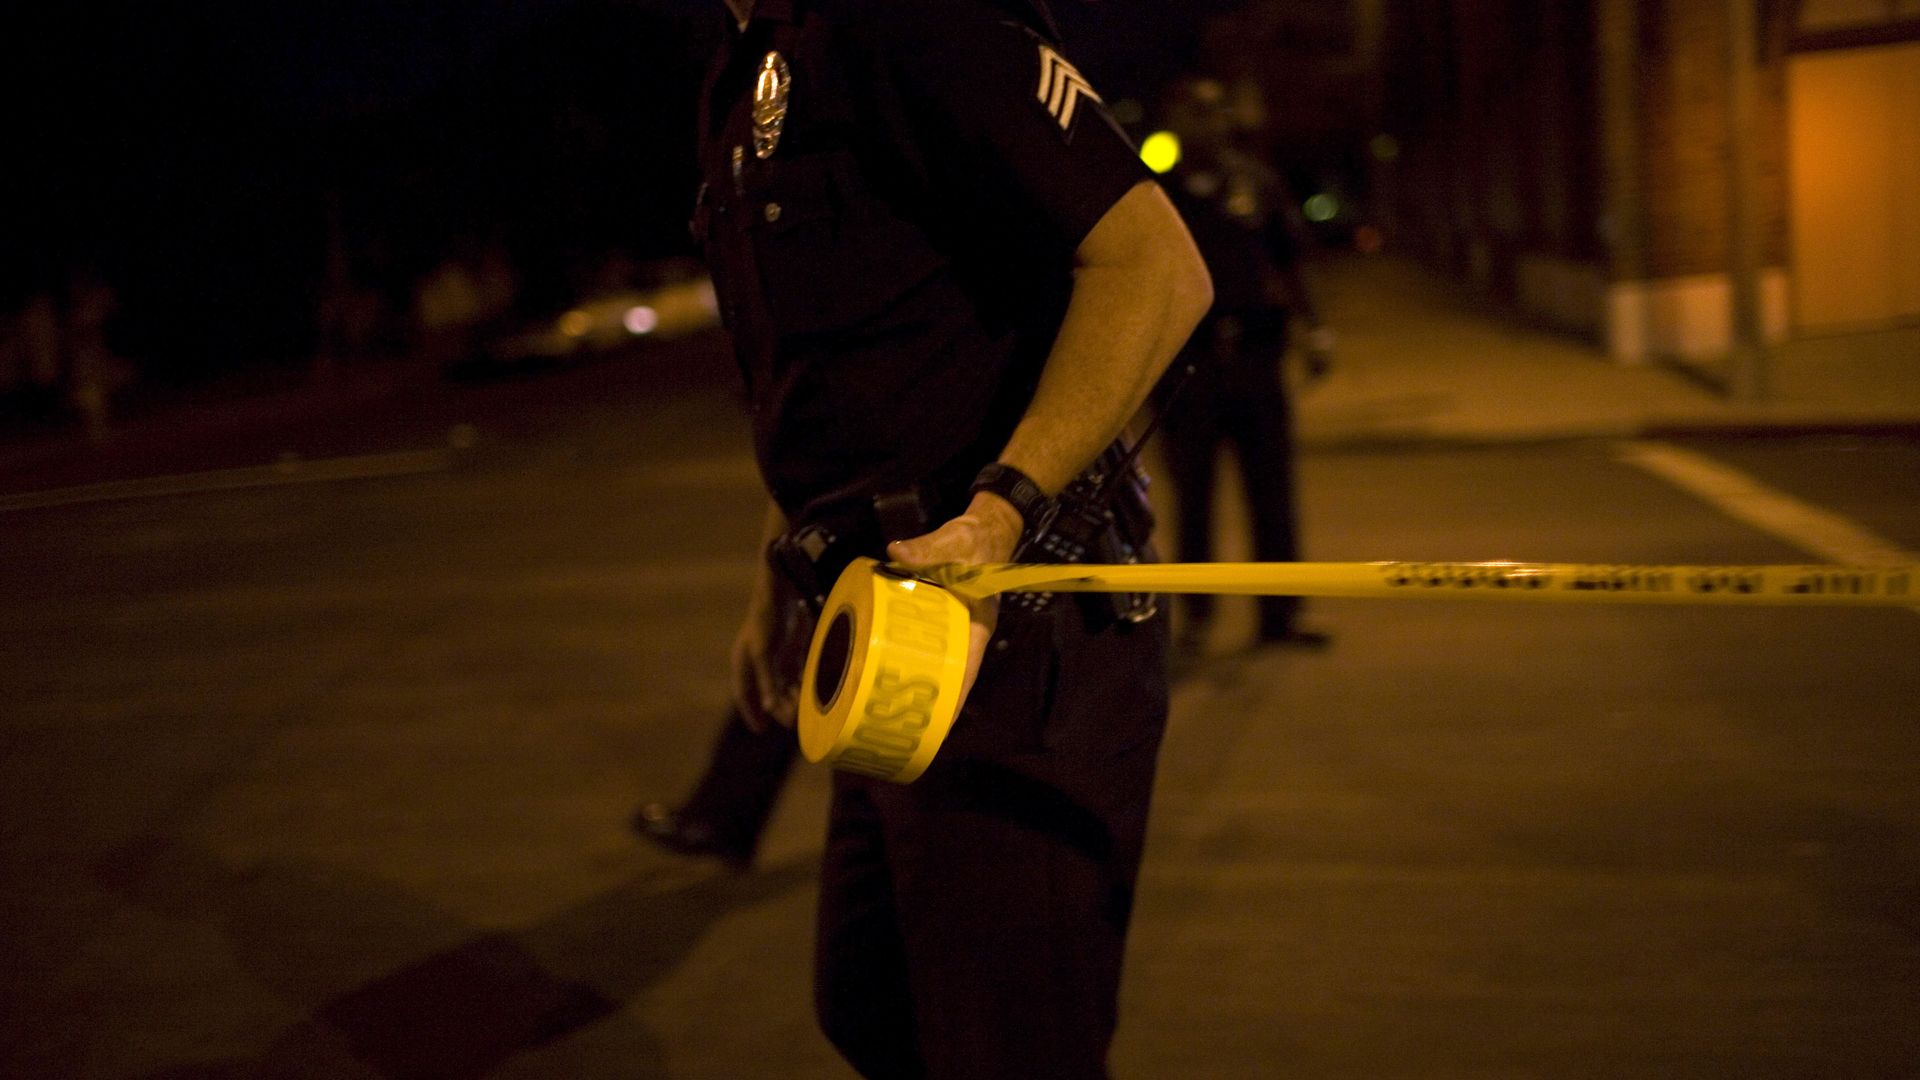 Los Angeles Police Department gang unit officers tape off a Crime Scene Investigation area following the shooting of a man September 14, 2007 in the Northeast precinct of Los Angeles, California.